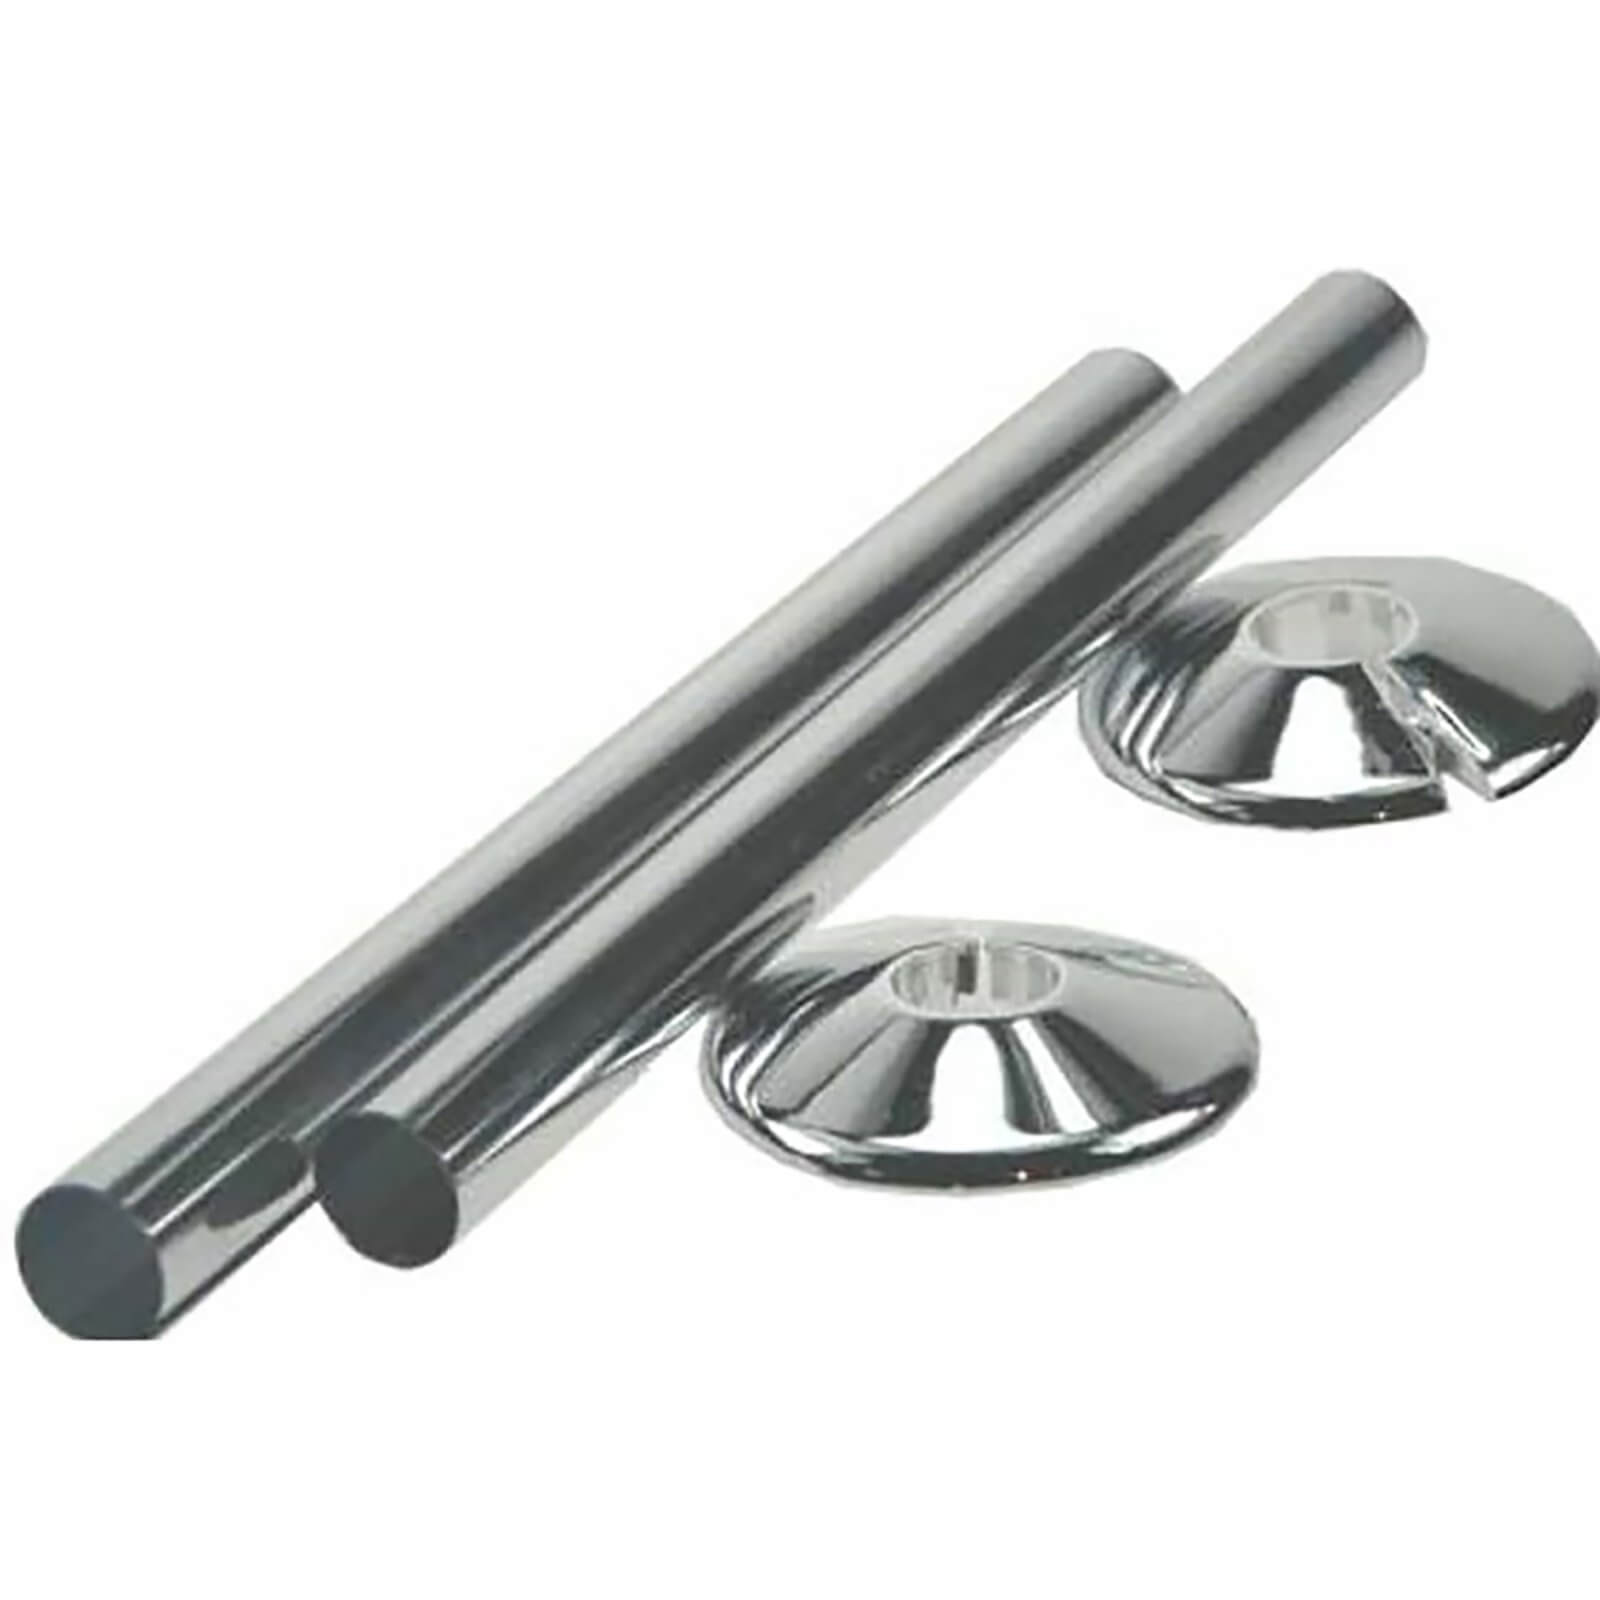 Radiator Finishing Kit with 2 Finish Pipe Covers & 2 Radiator Pipe Collars in Chrome - 15mm